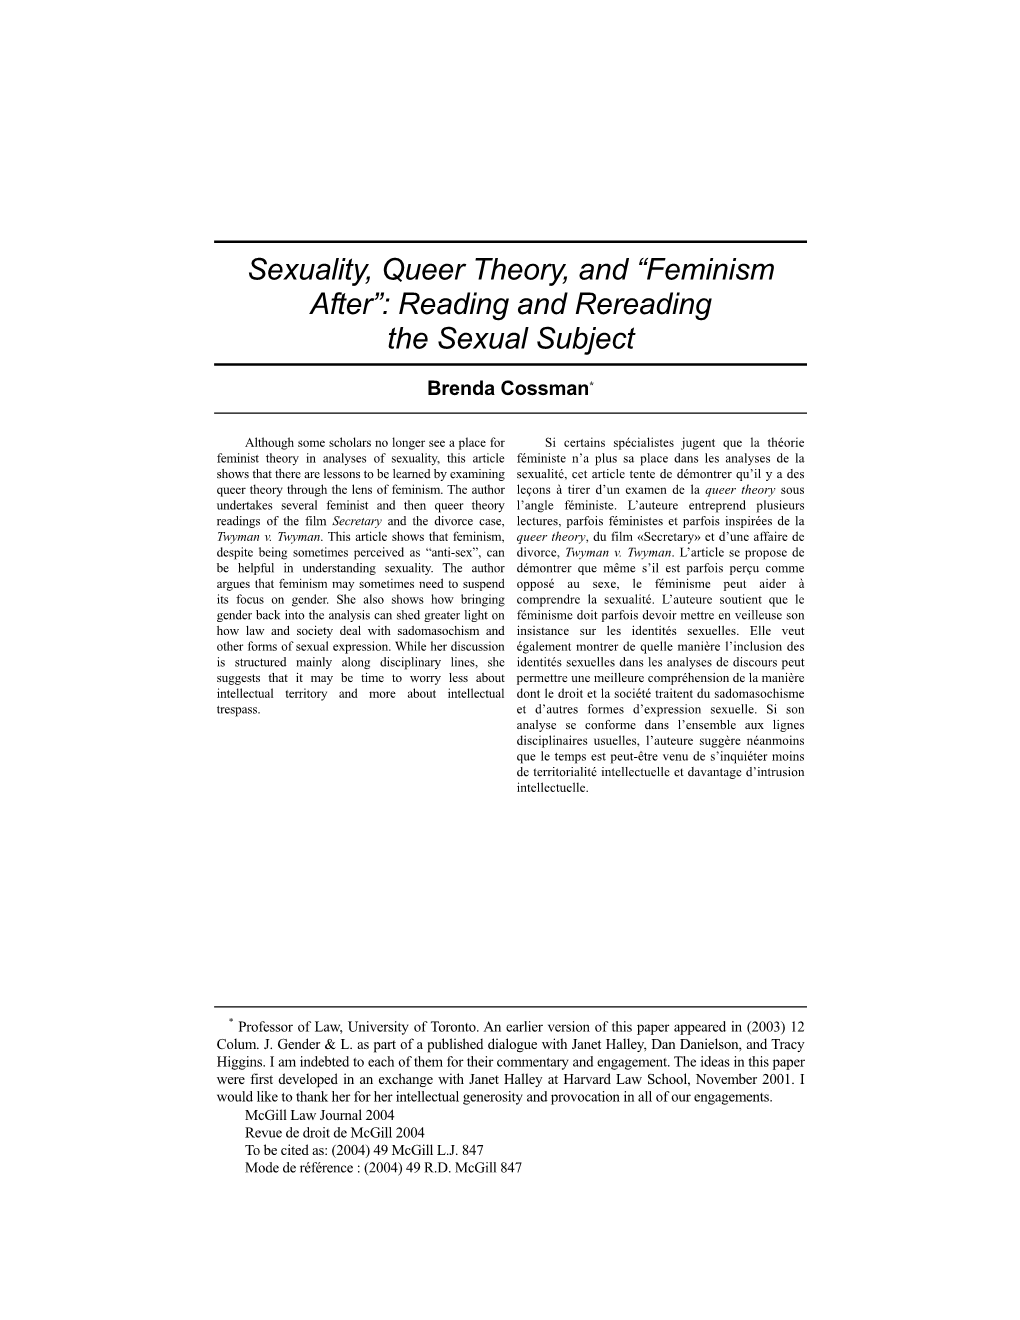 Sexuality, Queer Theory, and “Feminism After”: Reading and Rereading the Sexual Subject